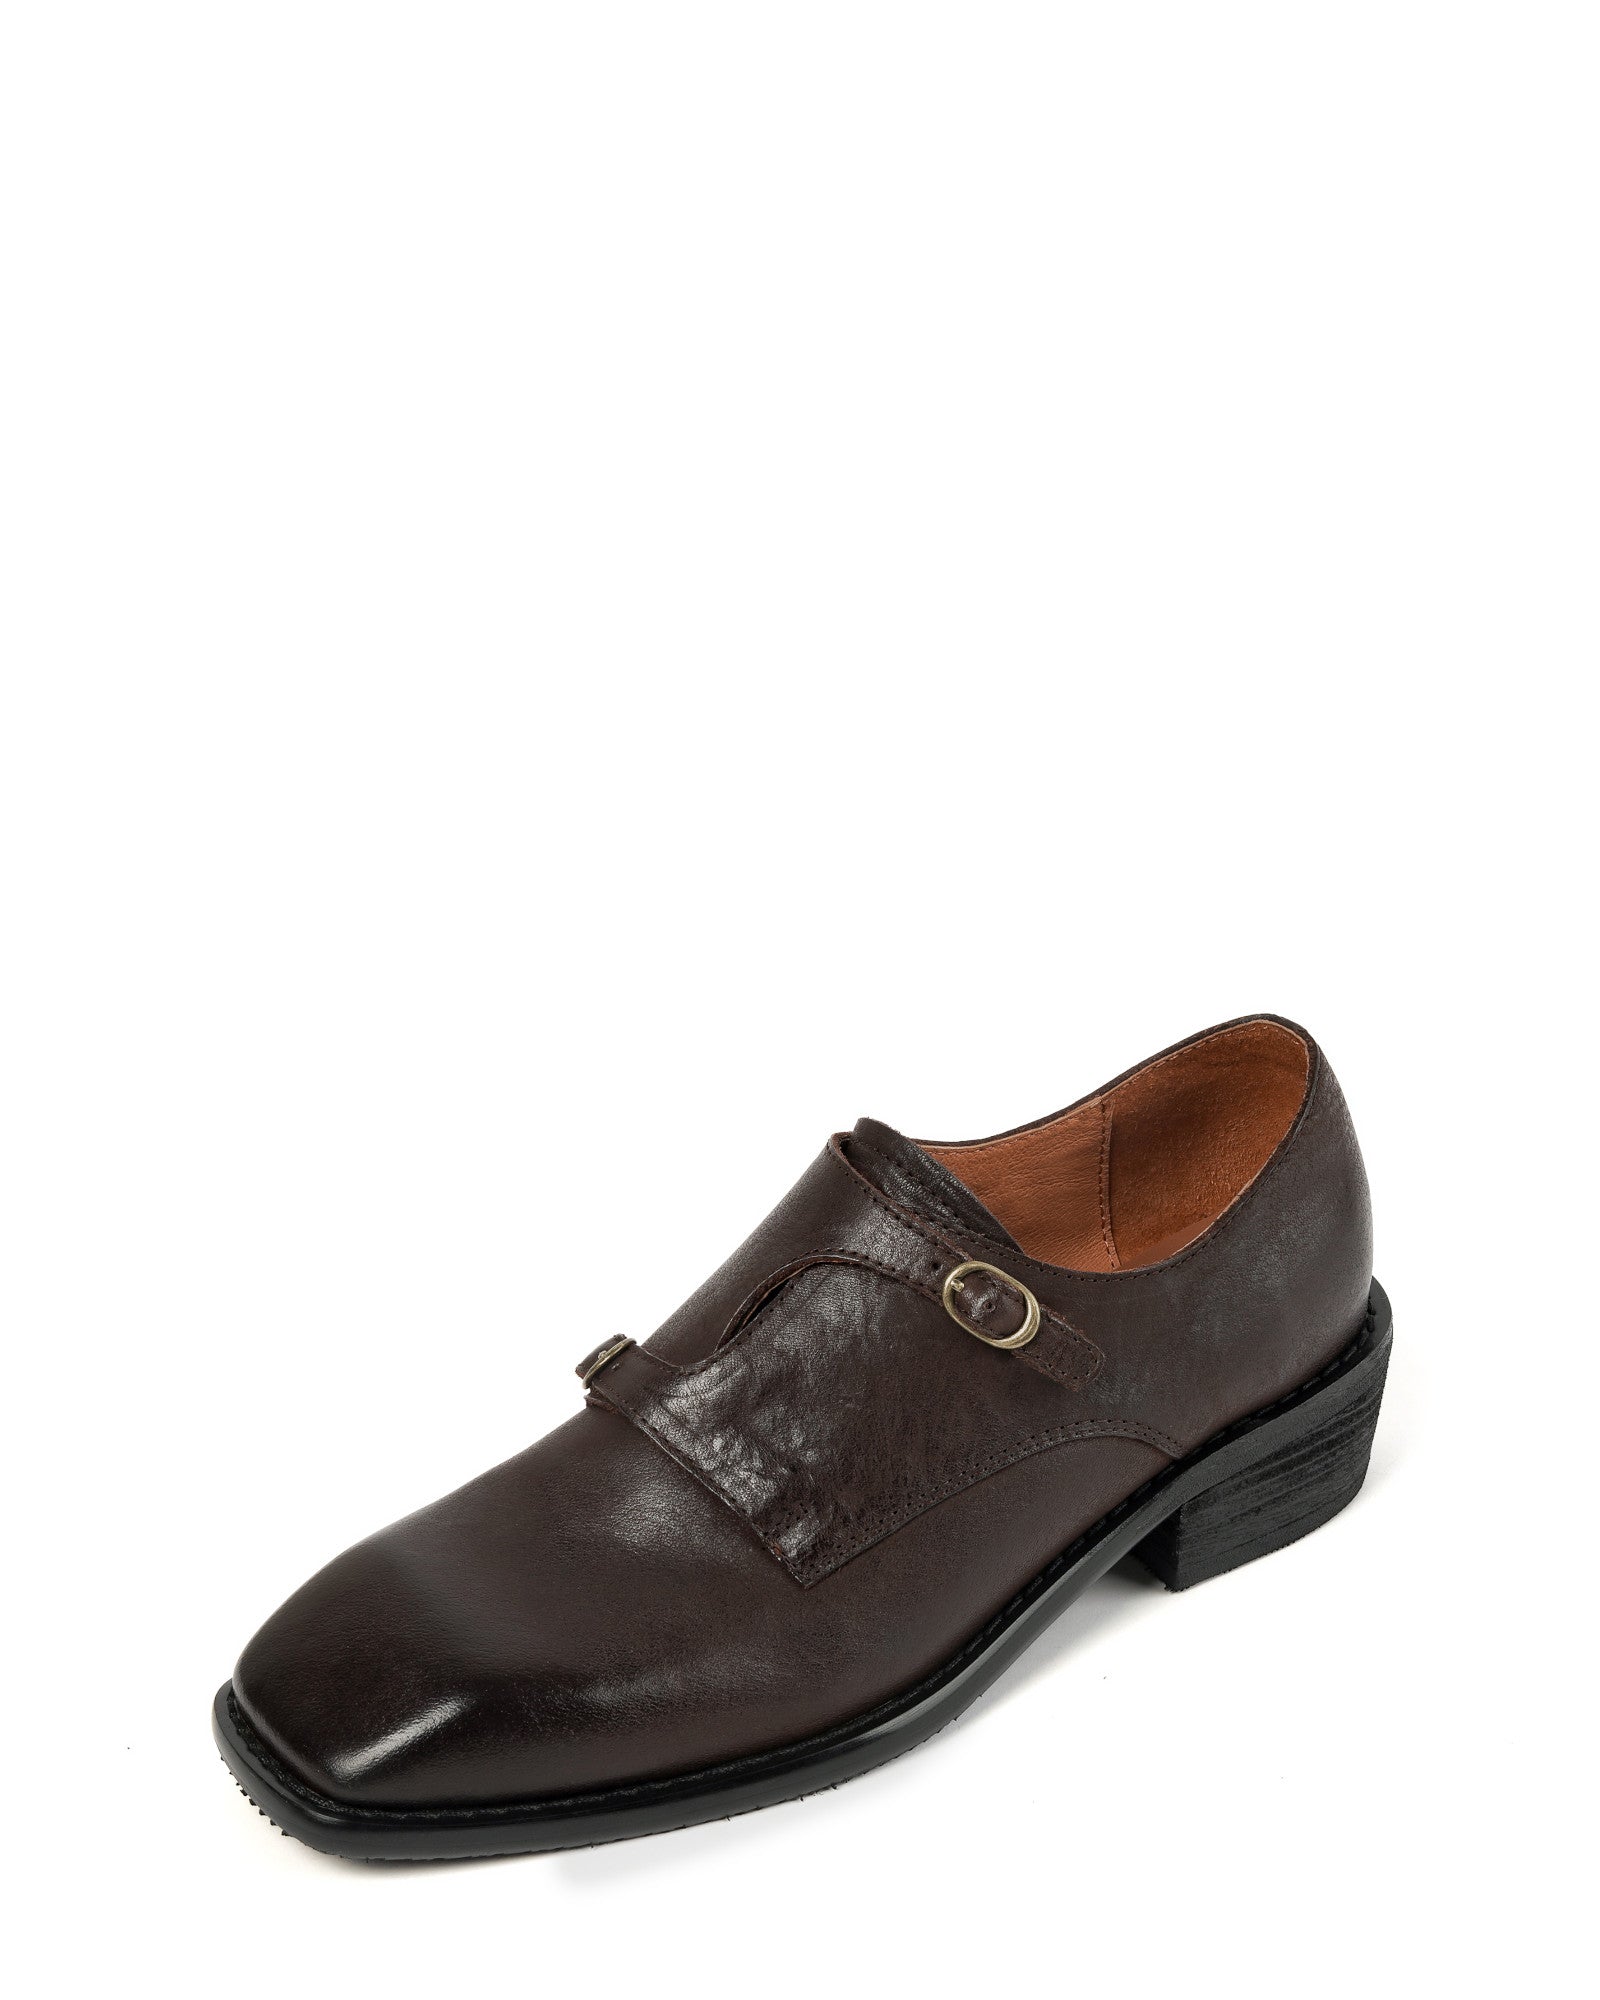 311-monk-style-leather-loafers-brown